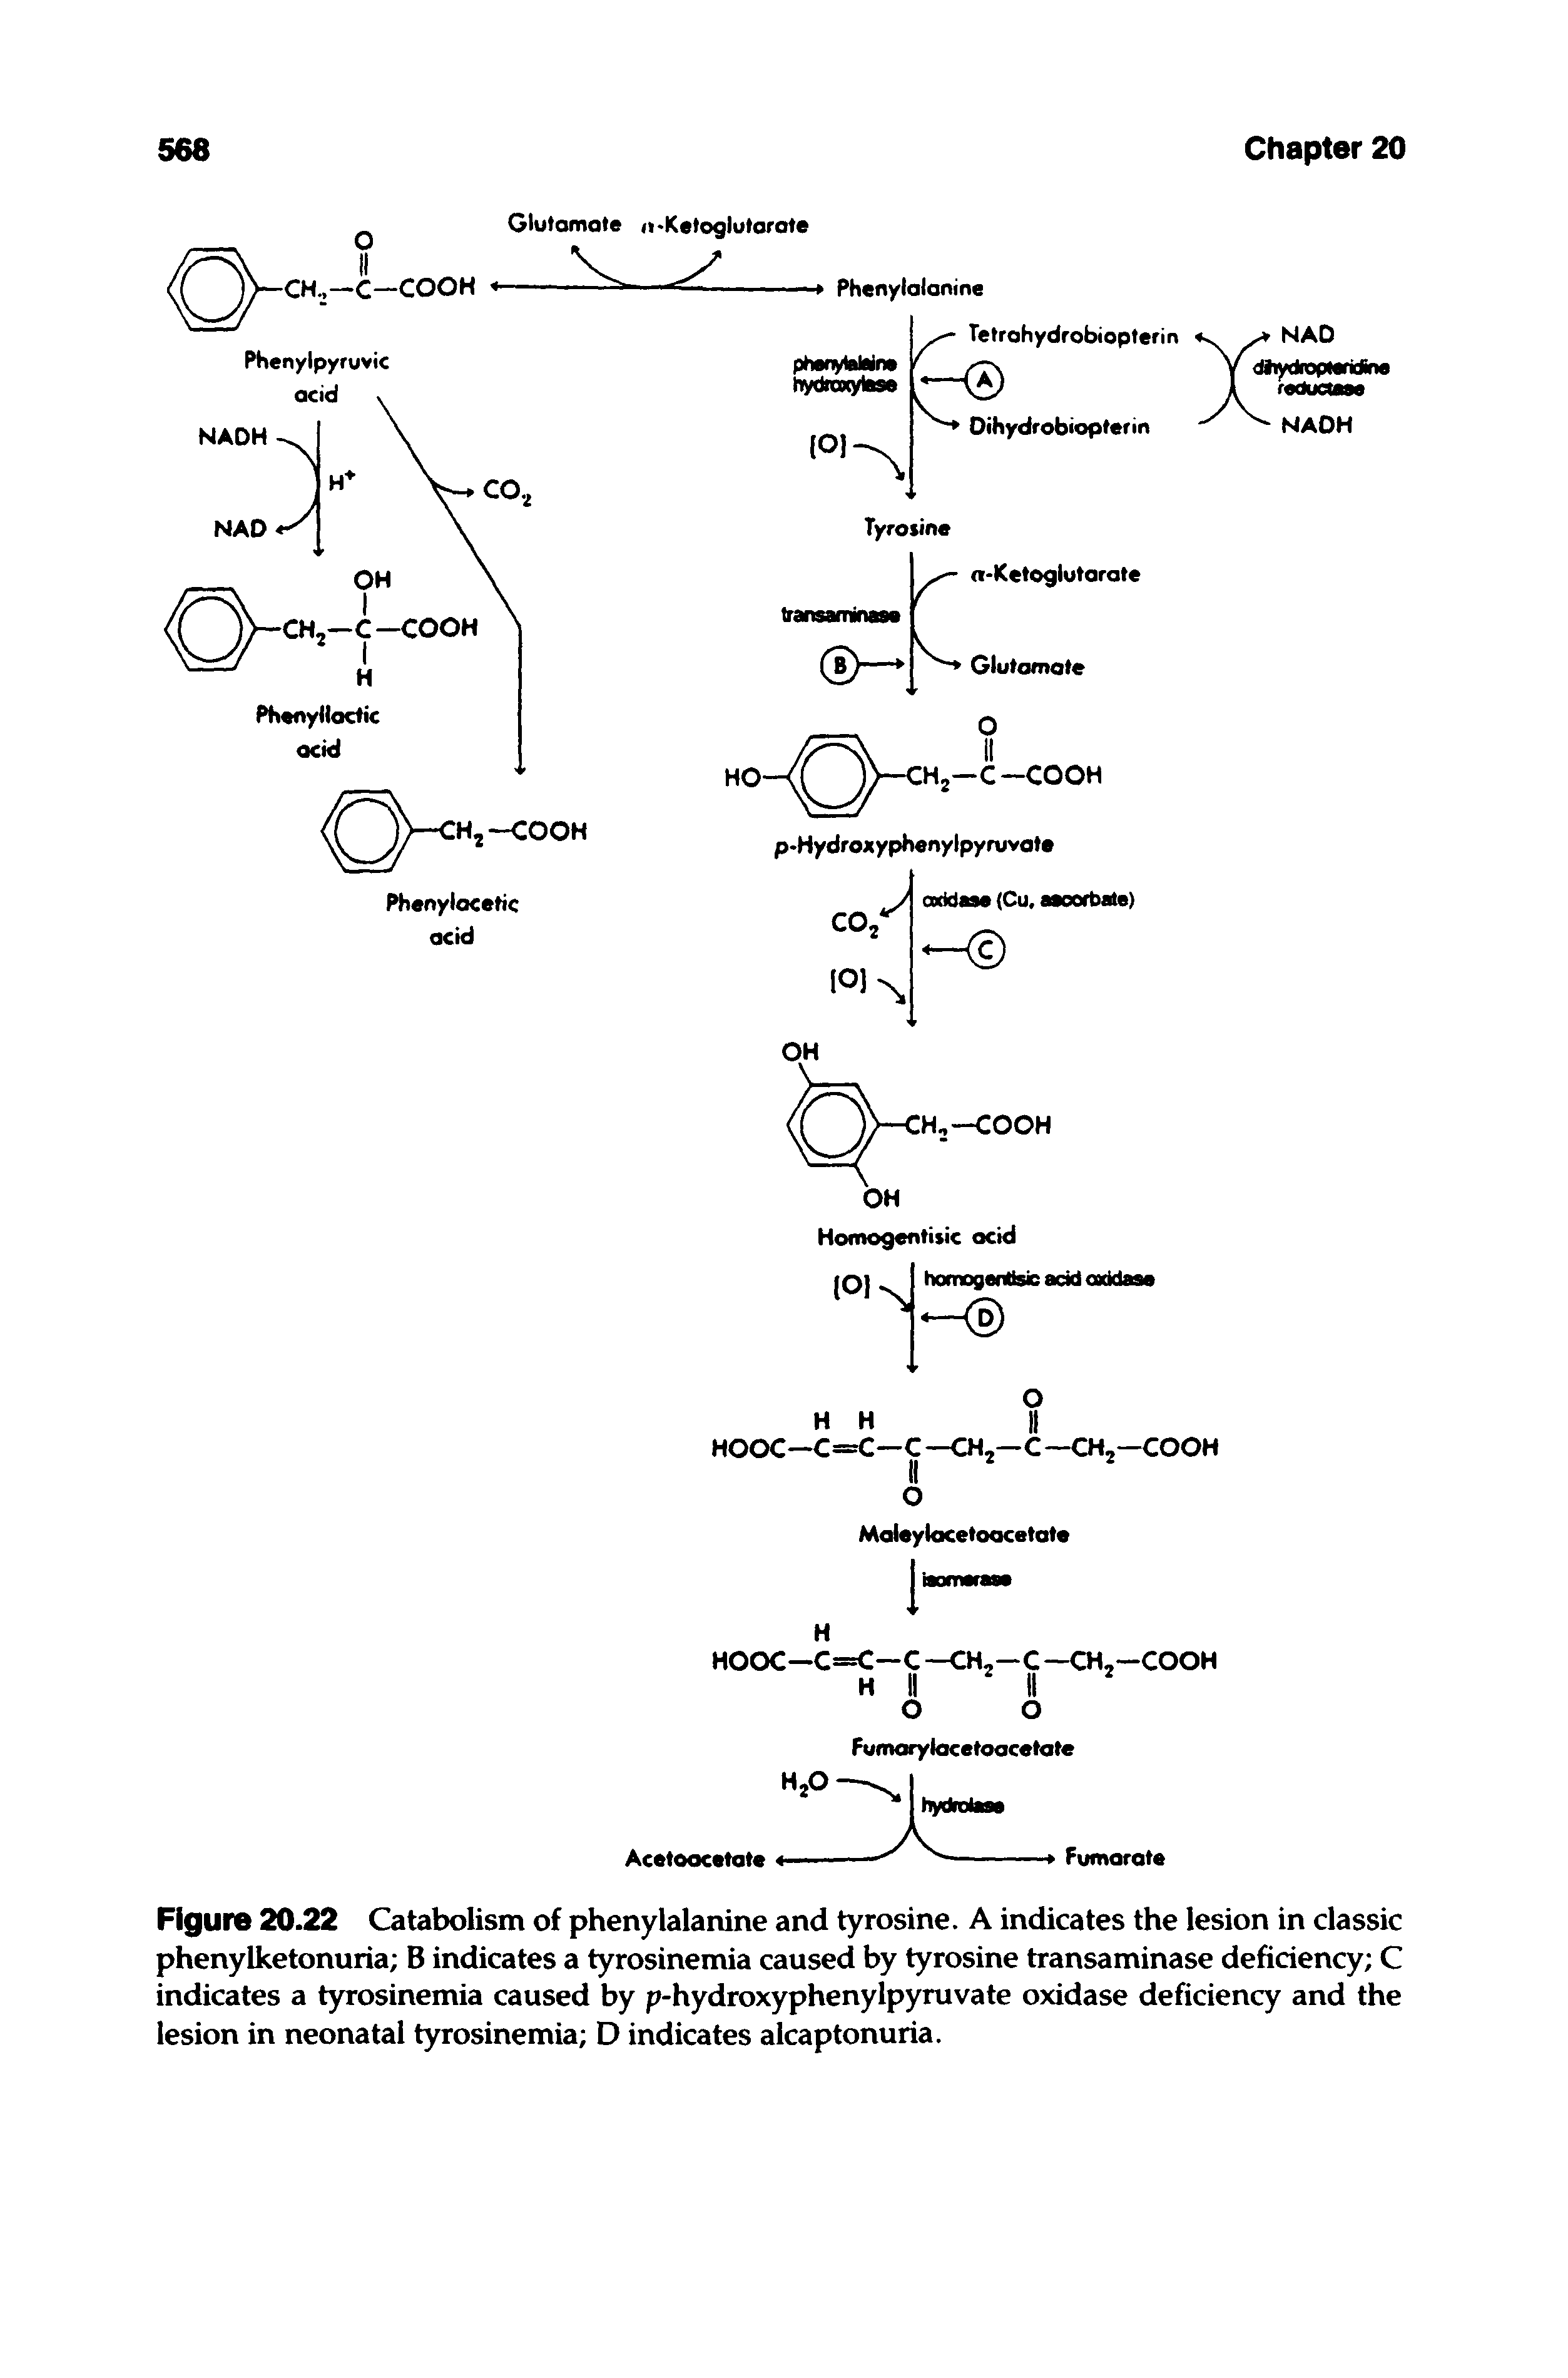 Figure 20.22 Catabolism of phenylalanine and tyrosine. A indicates the lesion in classic phenylketonuria B indicates a tyrosinemia caused by tyrosine transaminase deficiency C indicates a tyrosinemia caused by p-hydroxyphenylpyruvate oxidase deficiency and the lesion in neonatal tyrosinemia D indicates alcaptonuria.